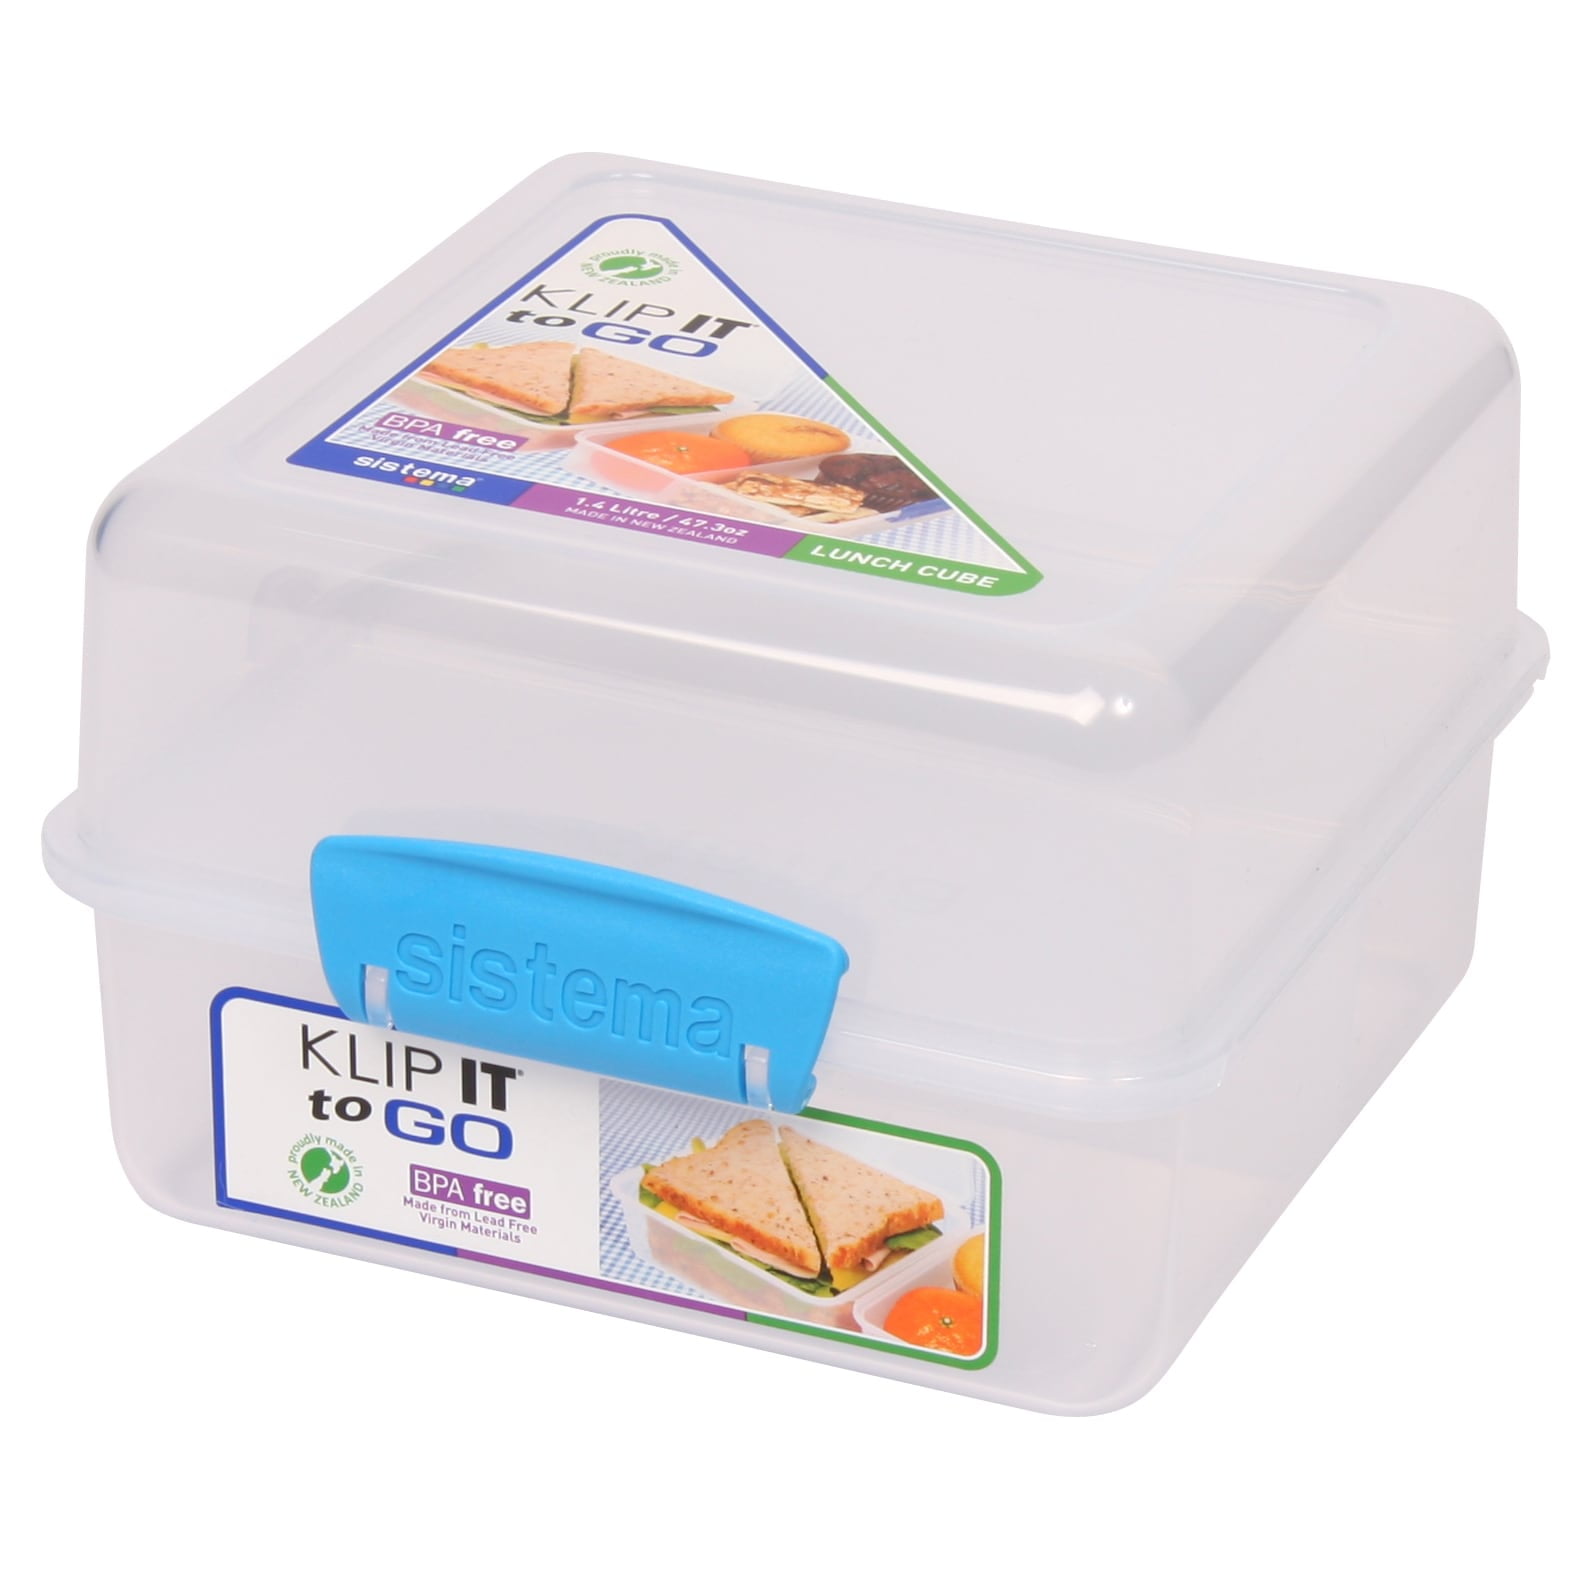 Lunch Cube Box with top Sandwich Compartment and 3 Lower Food Storage Bins